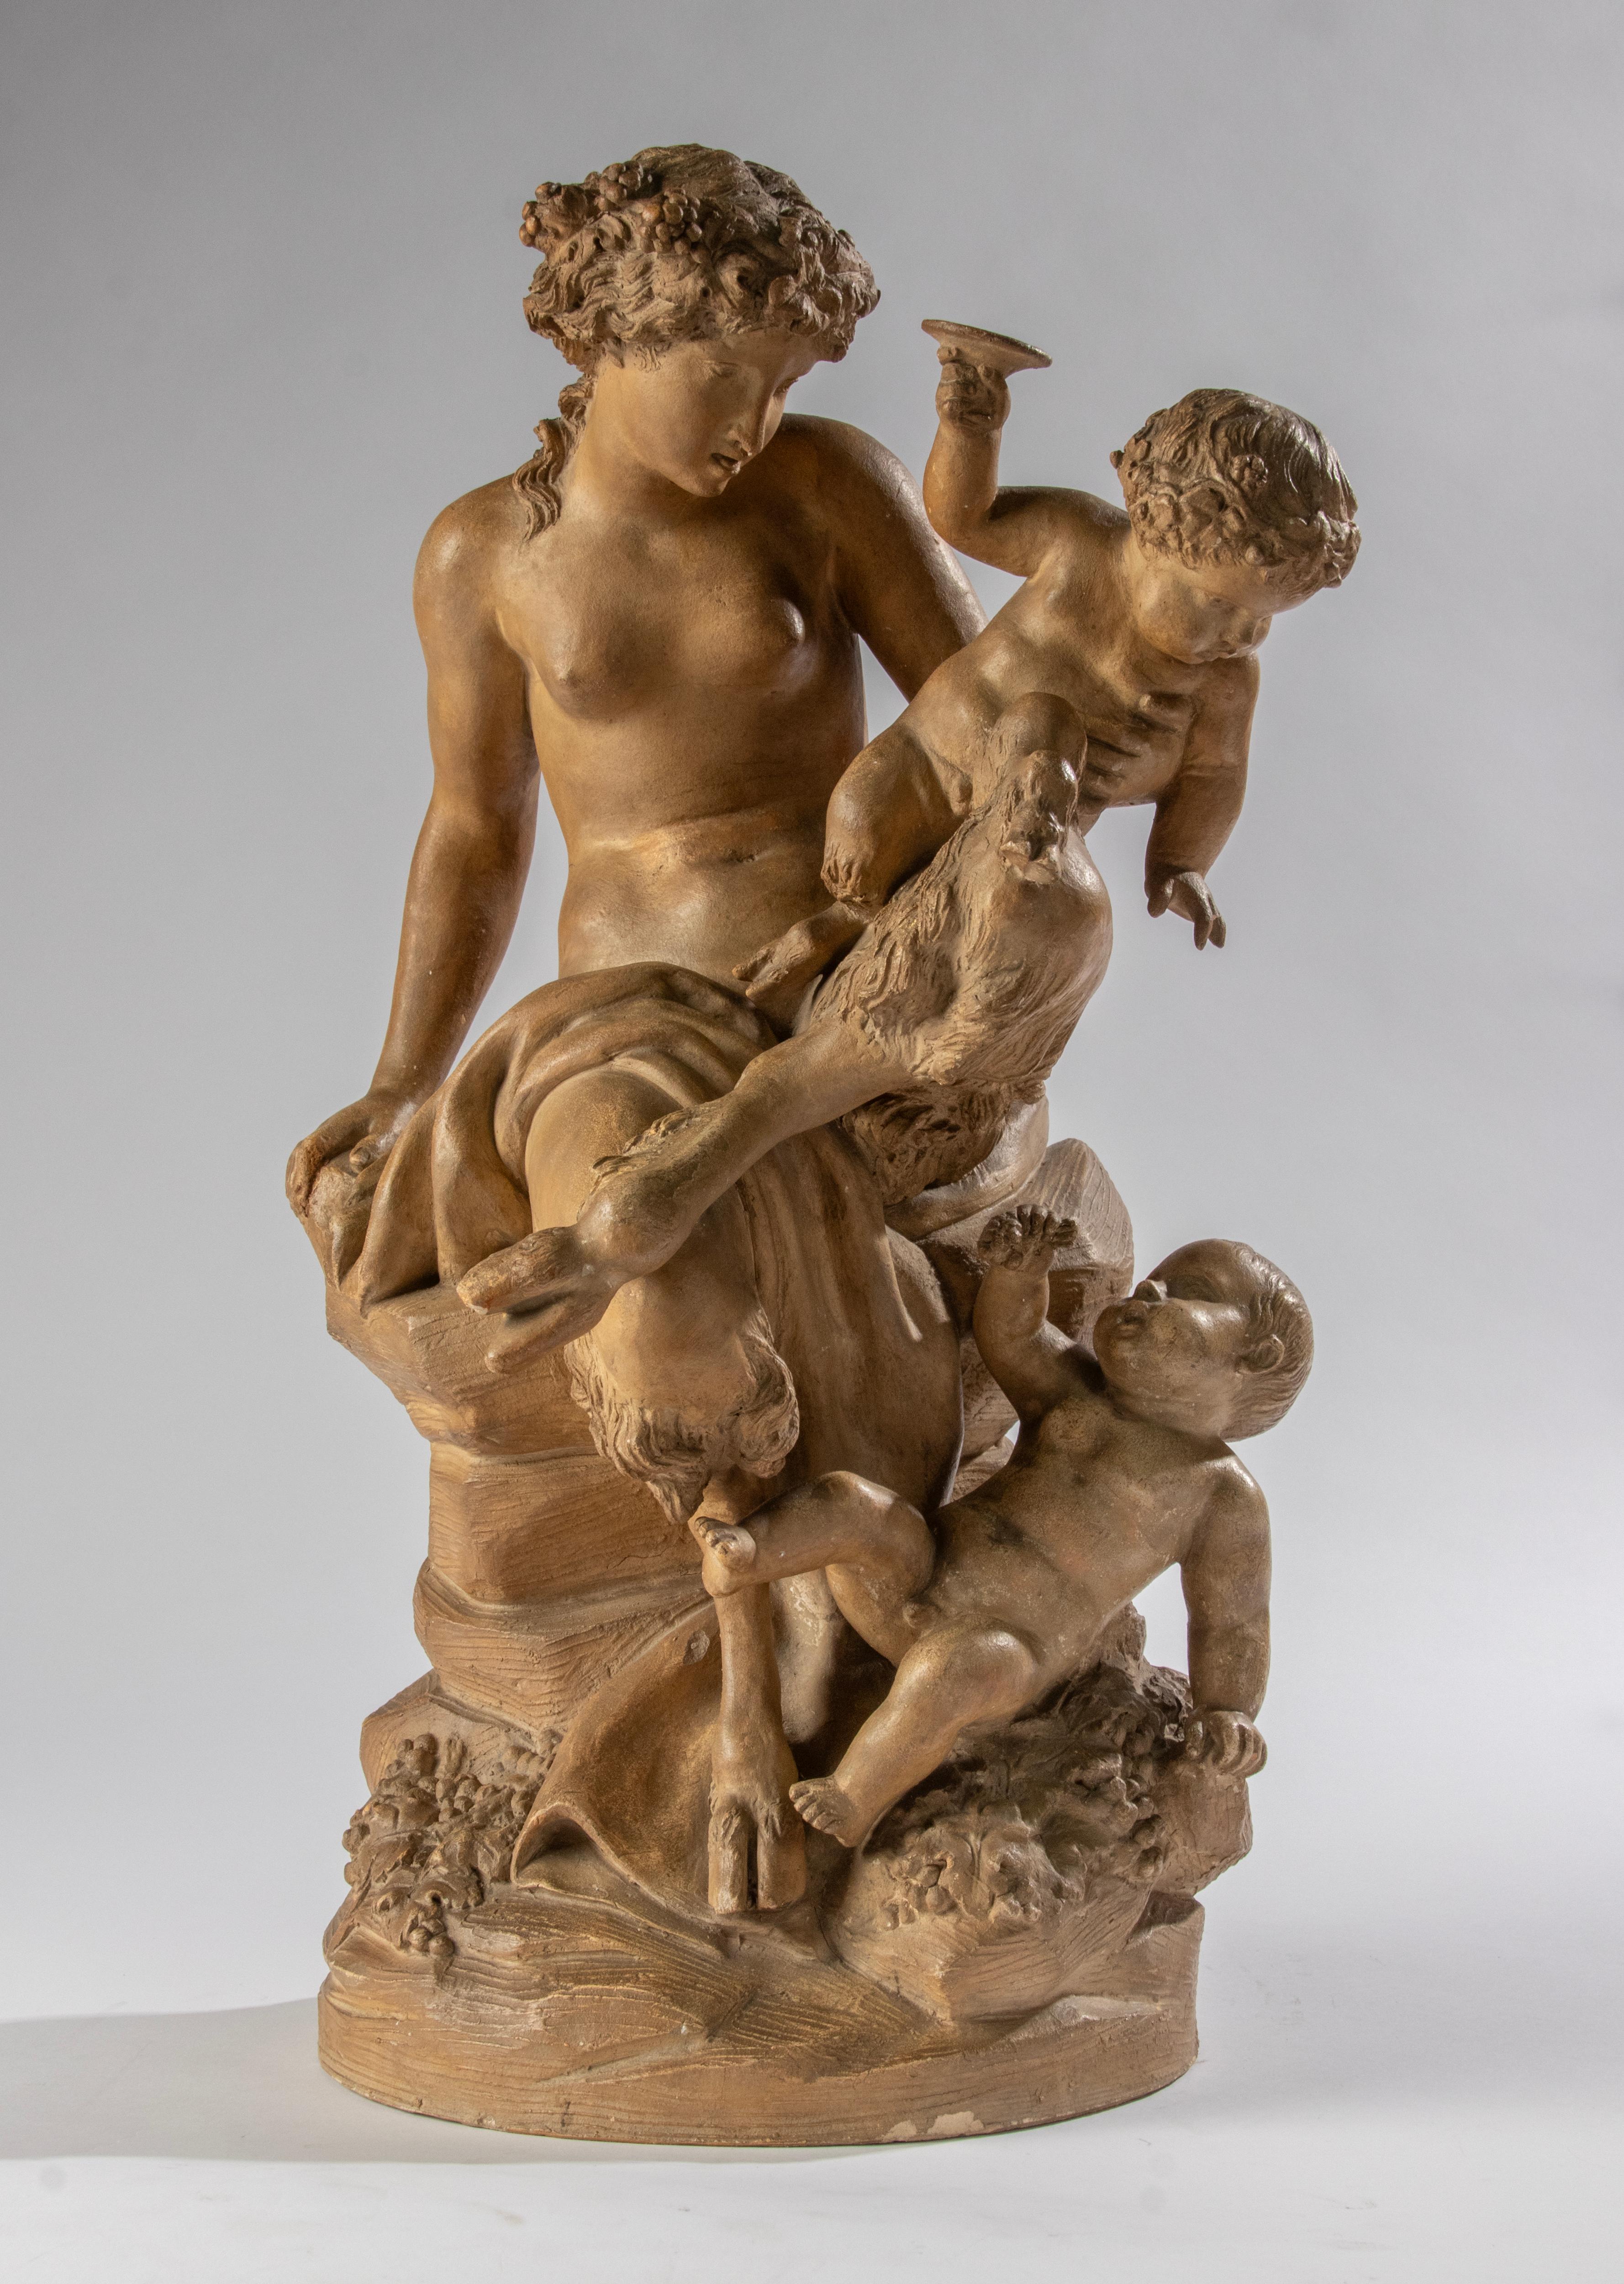 Rococo Antique Terracotta Bacchanale Sculpture with Faun and Putti - After Clodion For Sale